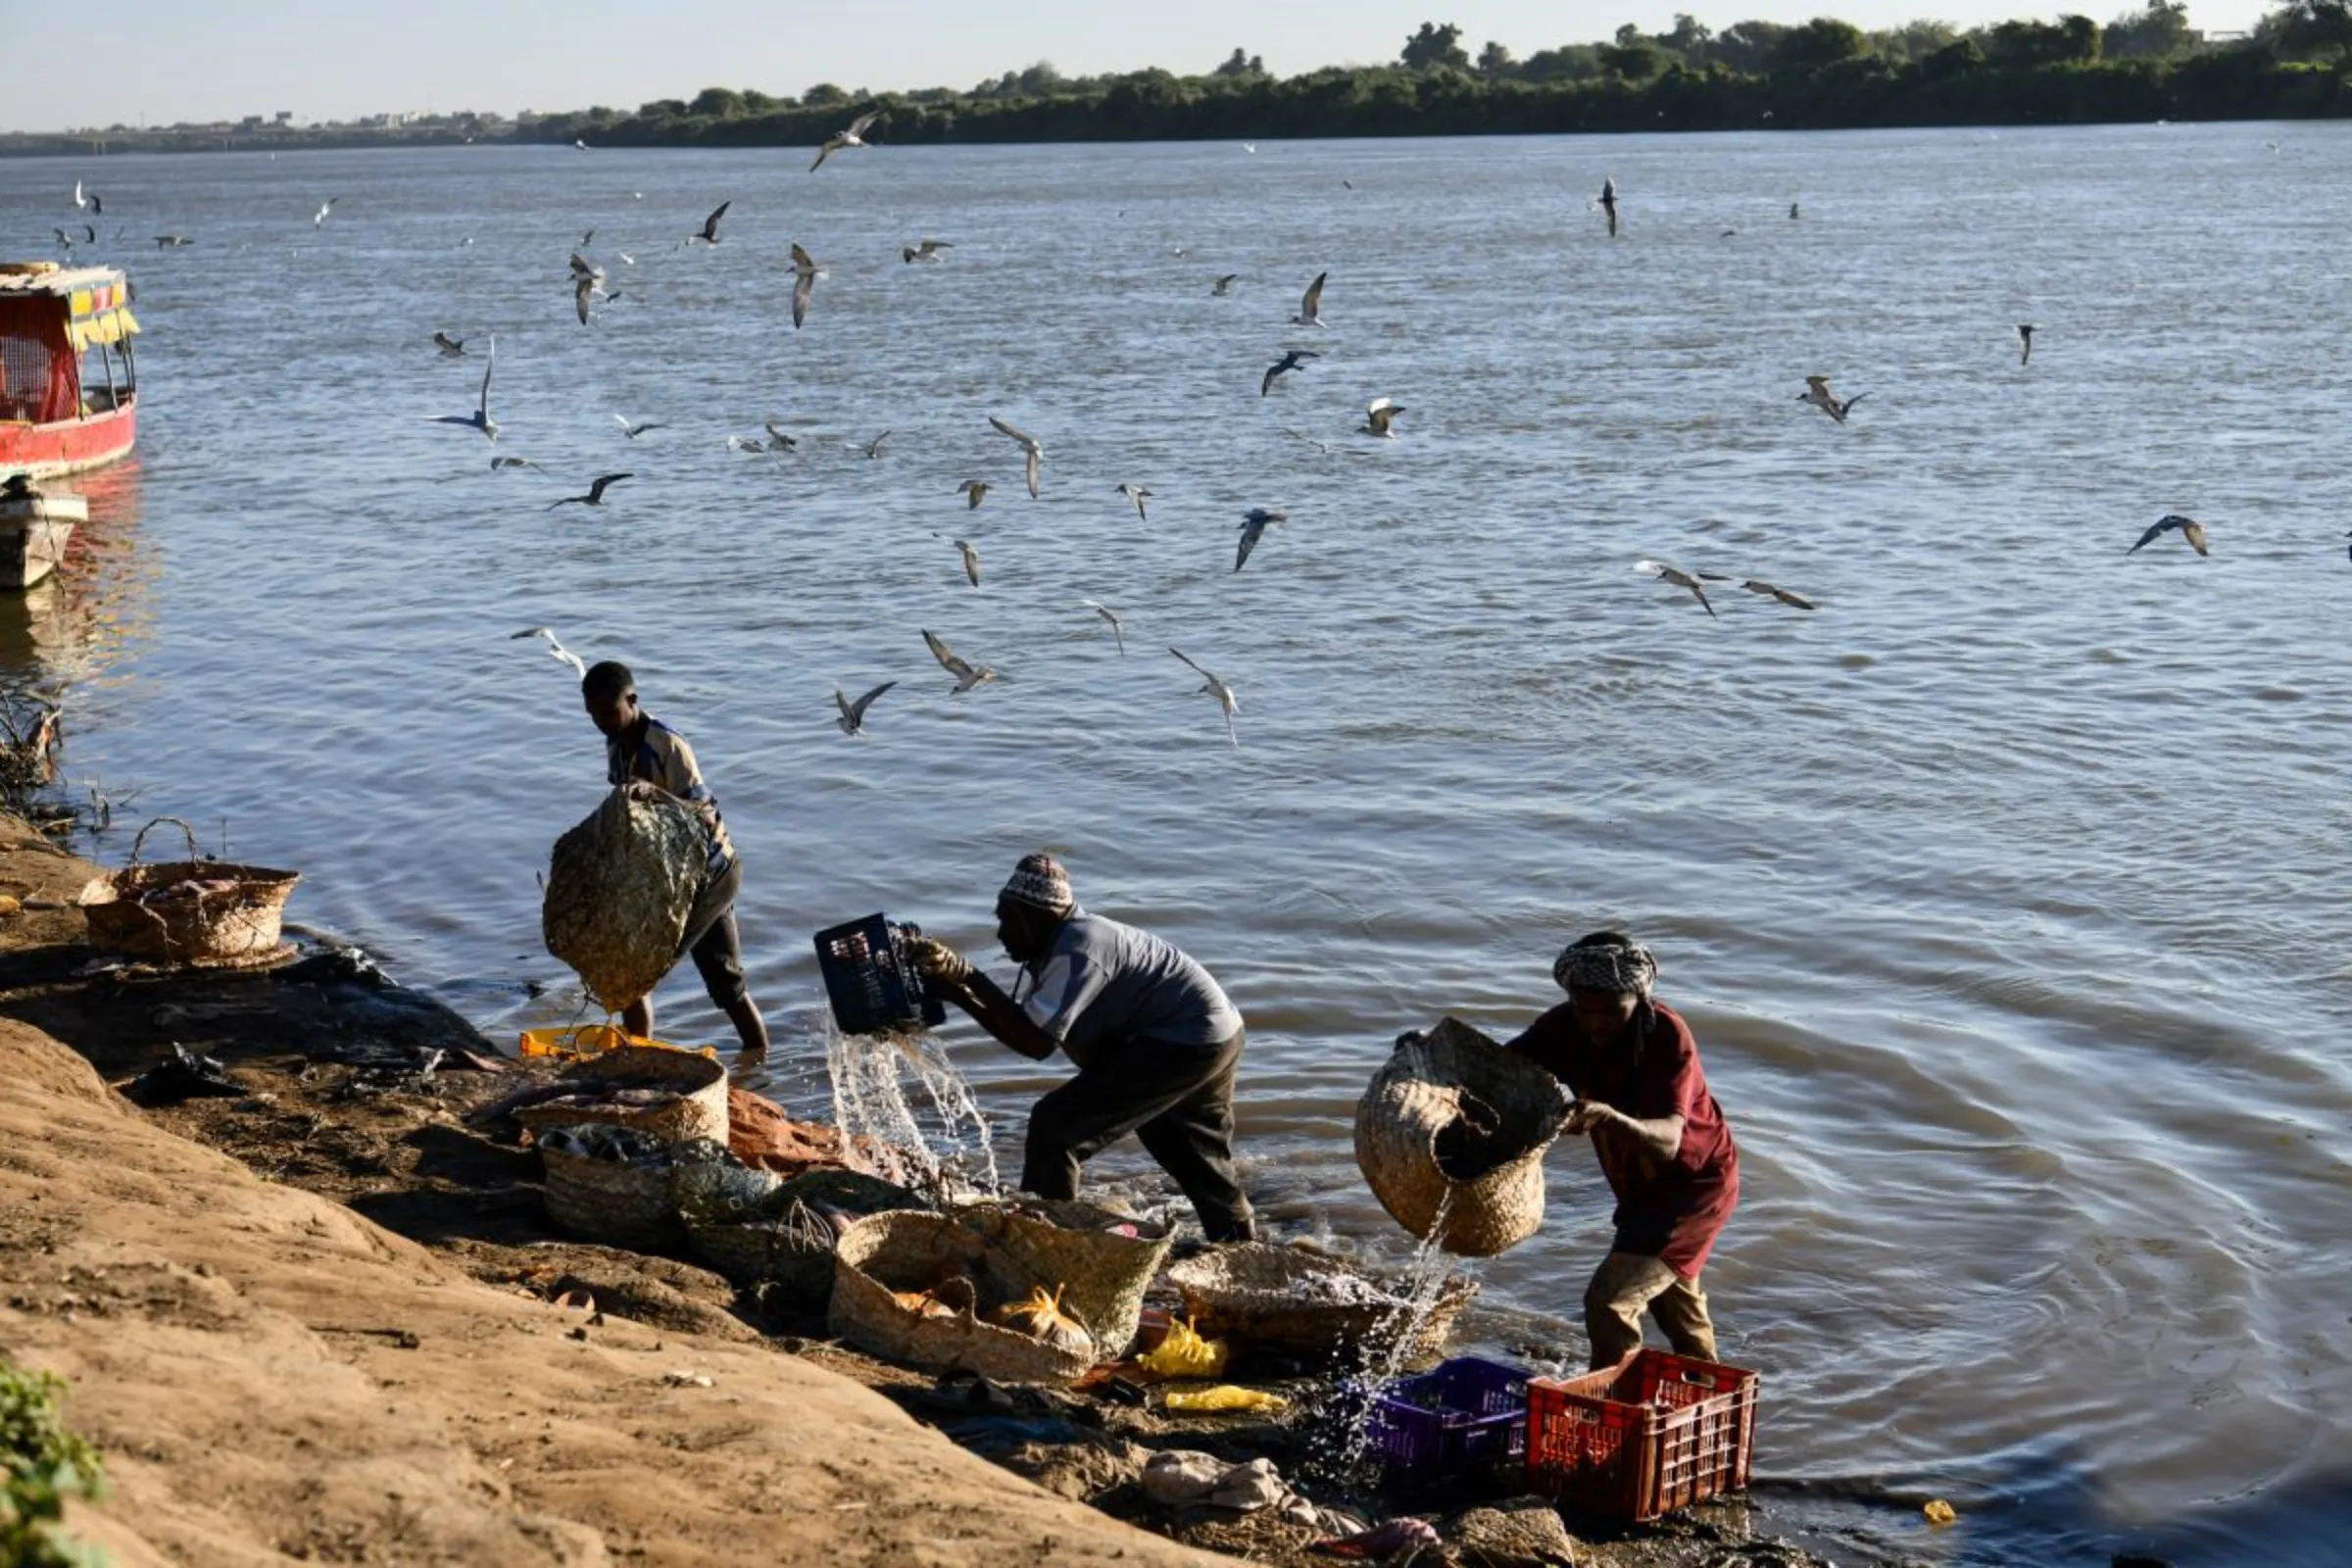 Sudanese workers wash the day’s catches of fish by the Nile River bank, before transporting the produce to vendors at Al-Mawrada Fish Market in Omdurman, Sudan, January 7, 2023. Thomson Reuters Foundation/Ela Yokes